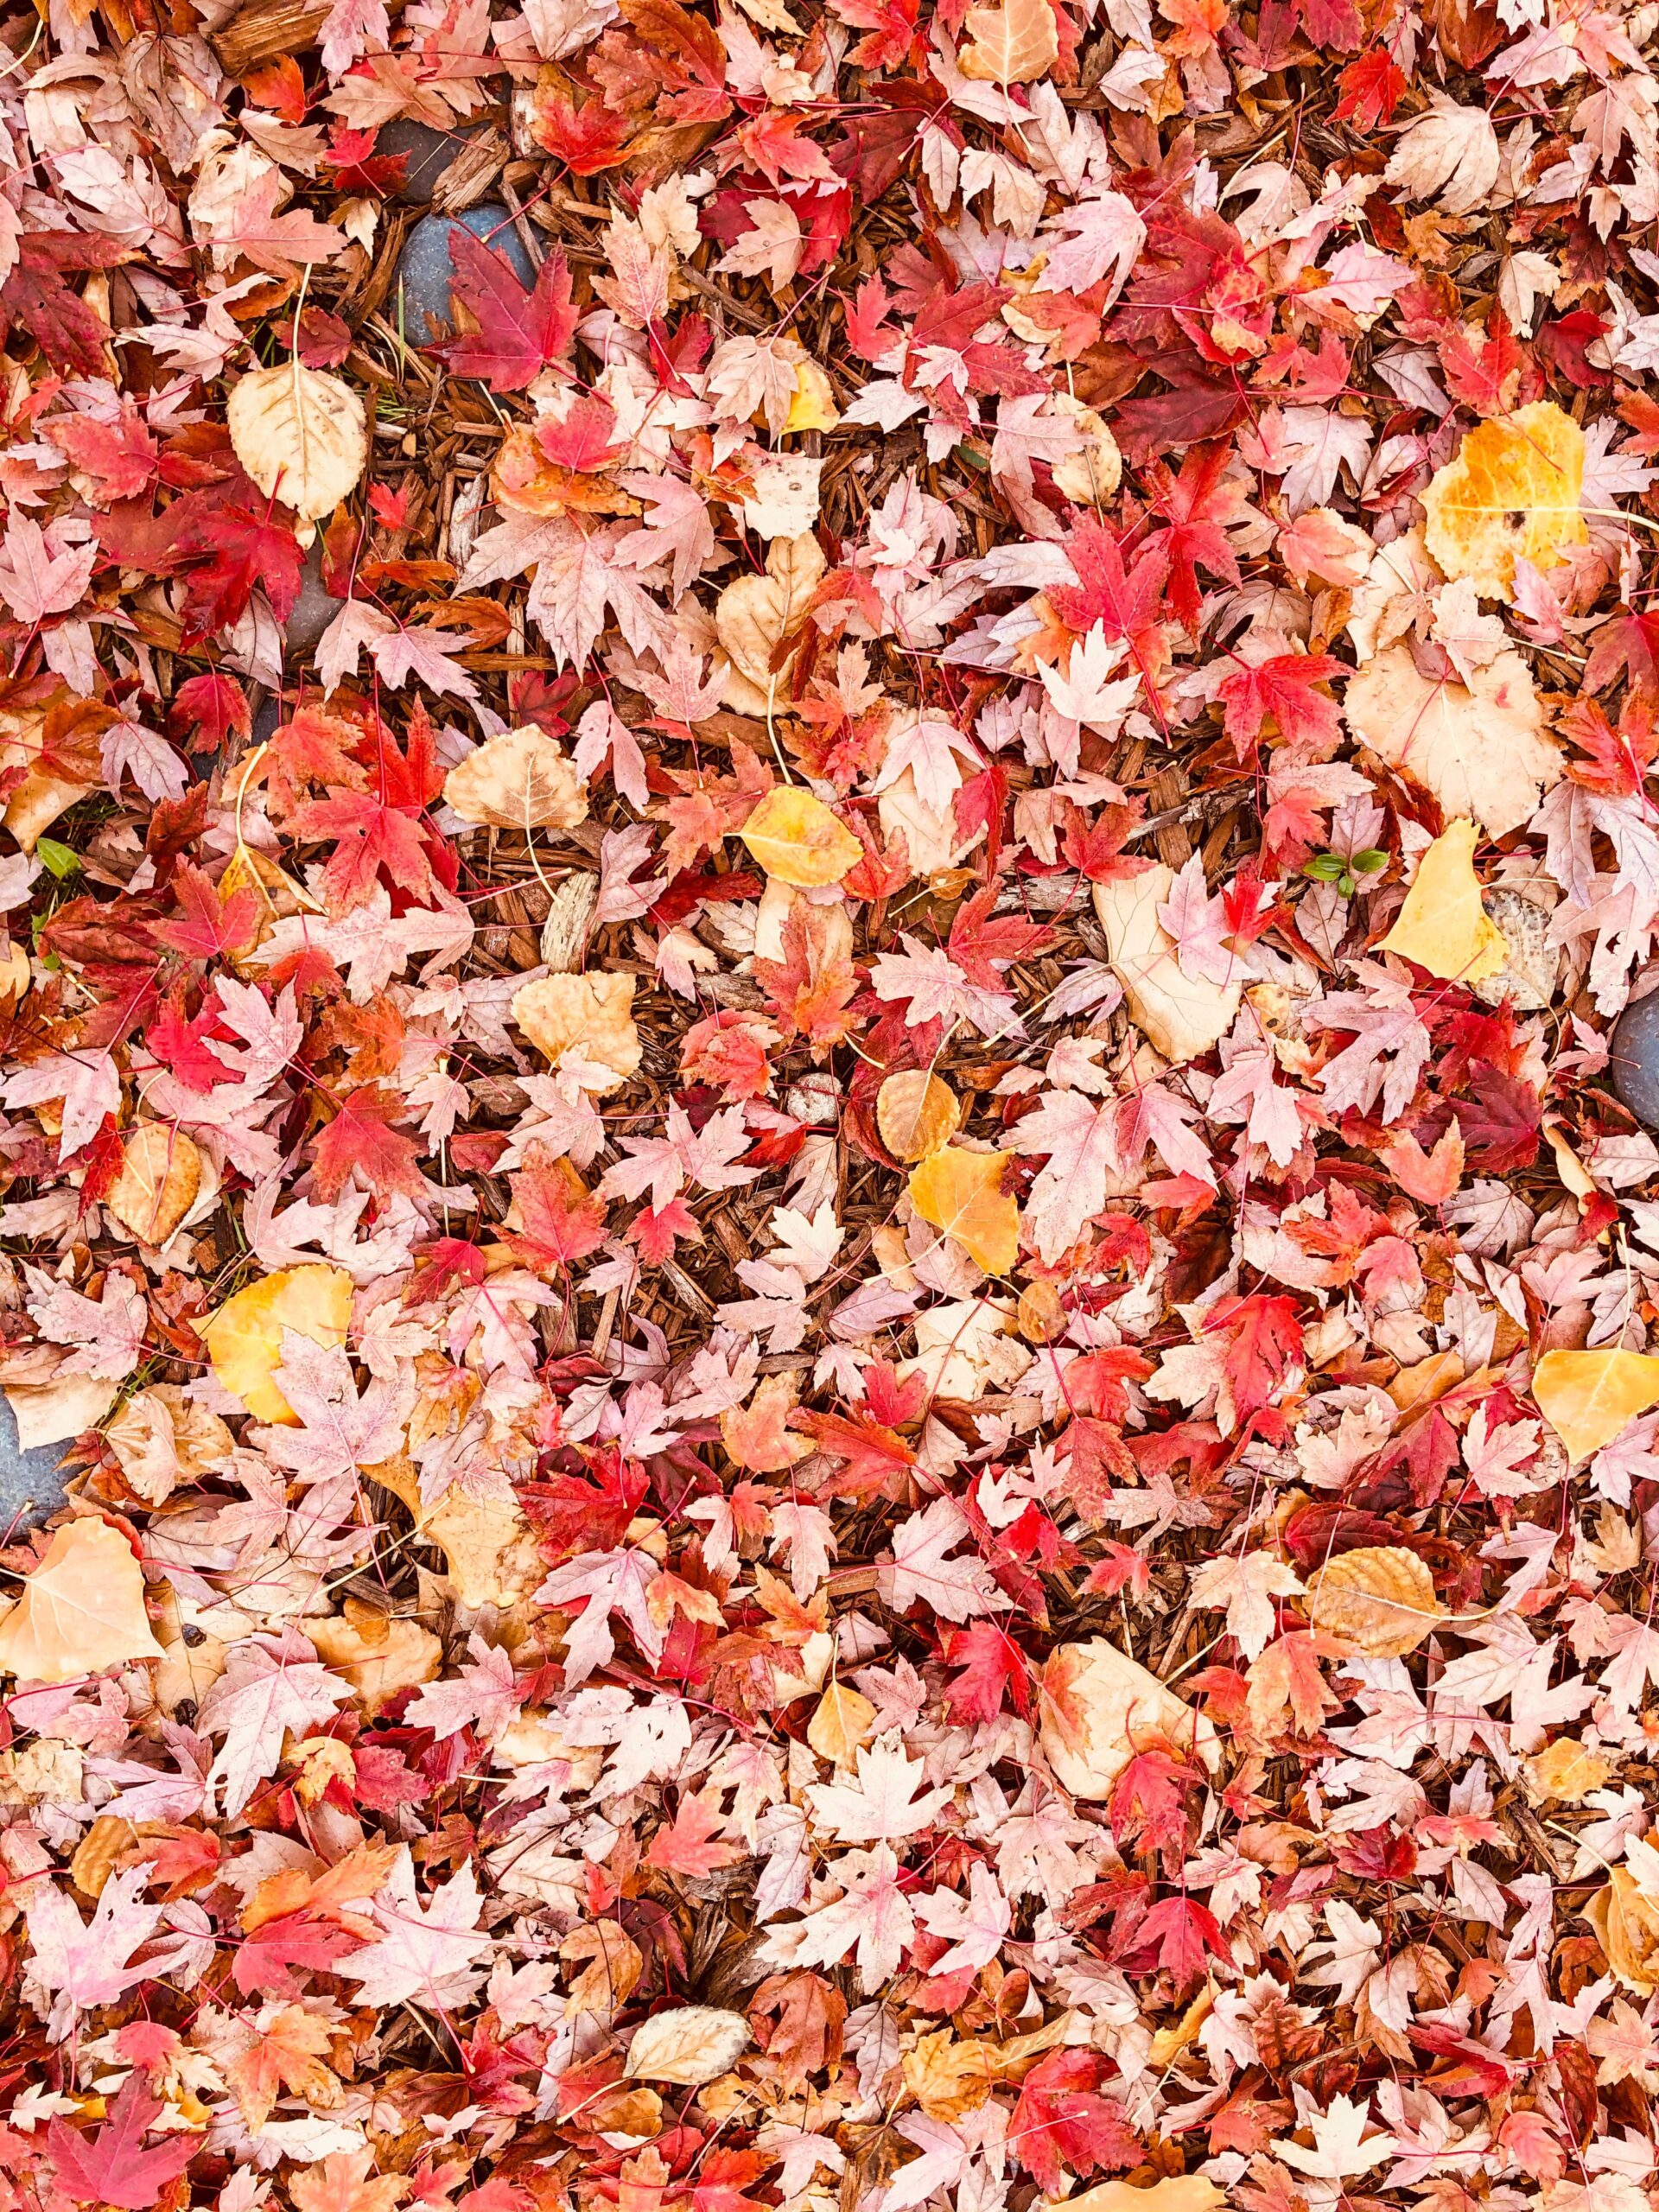 You are currently viewing Mulching Vs. Removal of Fall Leaves